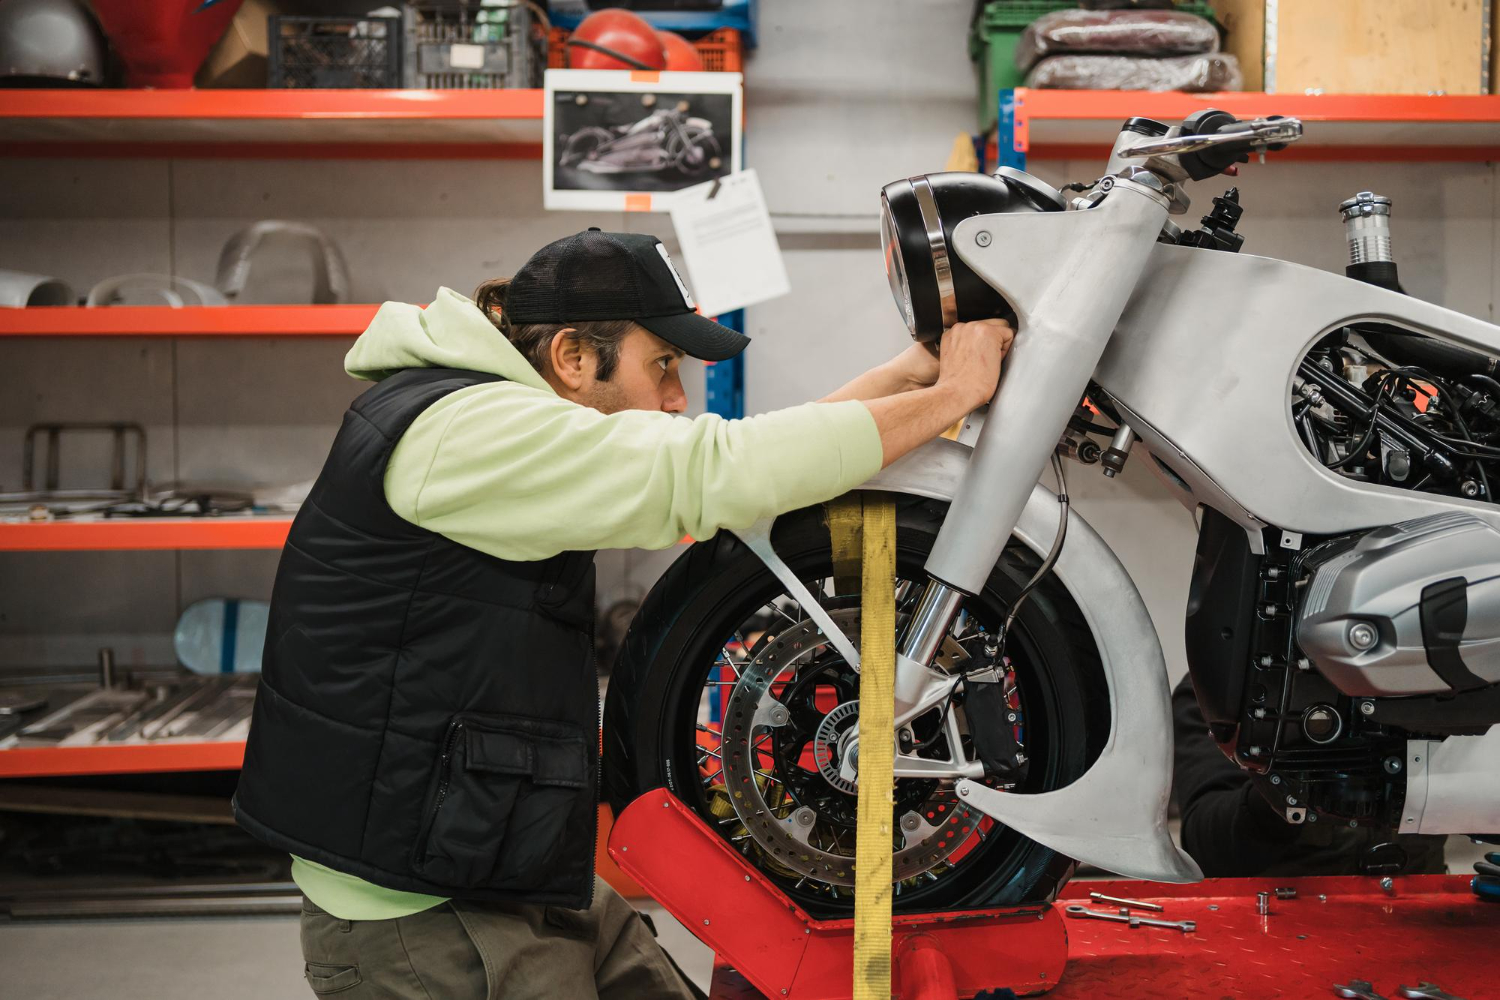 Ride with Confidence: PlugDart Motorcycle Service Center